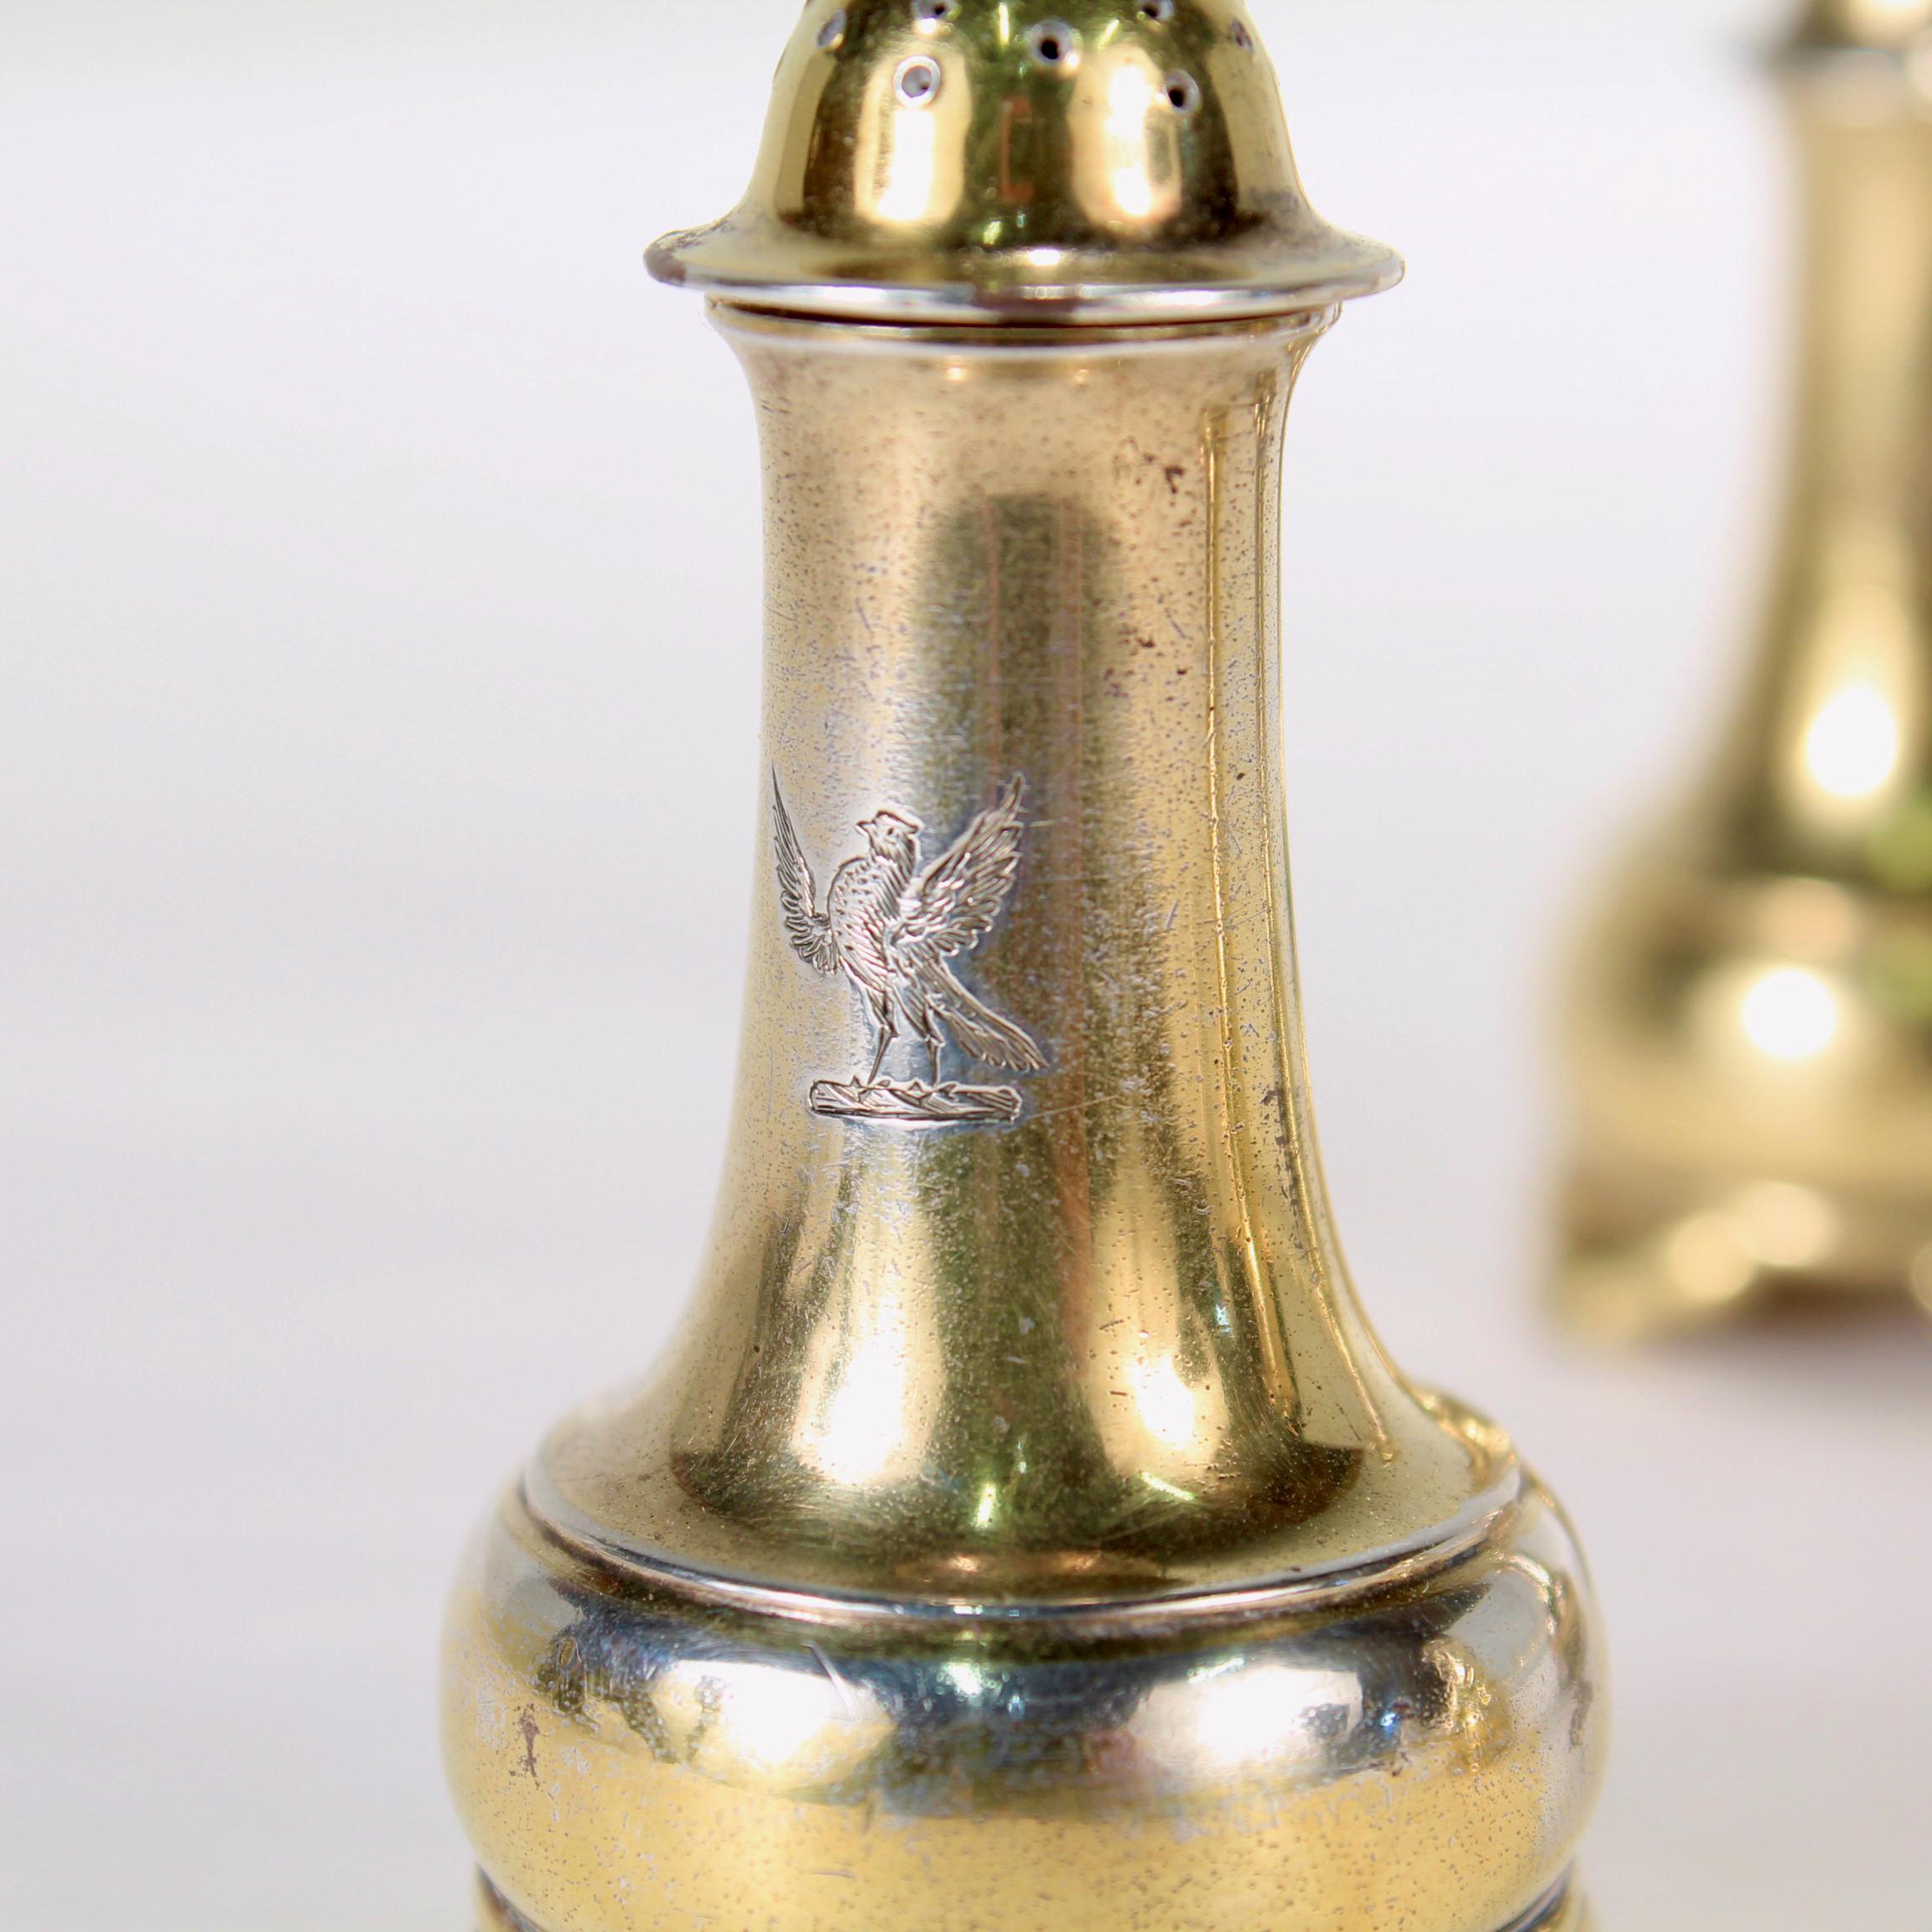 A very fine set of 4 antique gilt sterling silver salt & pepper shakers.

By Tiffany & Co. 

Each shaker is engraved to the center with a Crest of a large bird (which appears to be a hawk or bird of prey).

Simply wonderful salt shakers from Tiffany